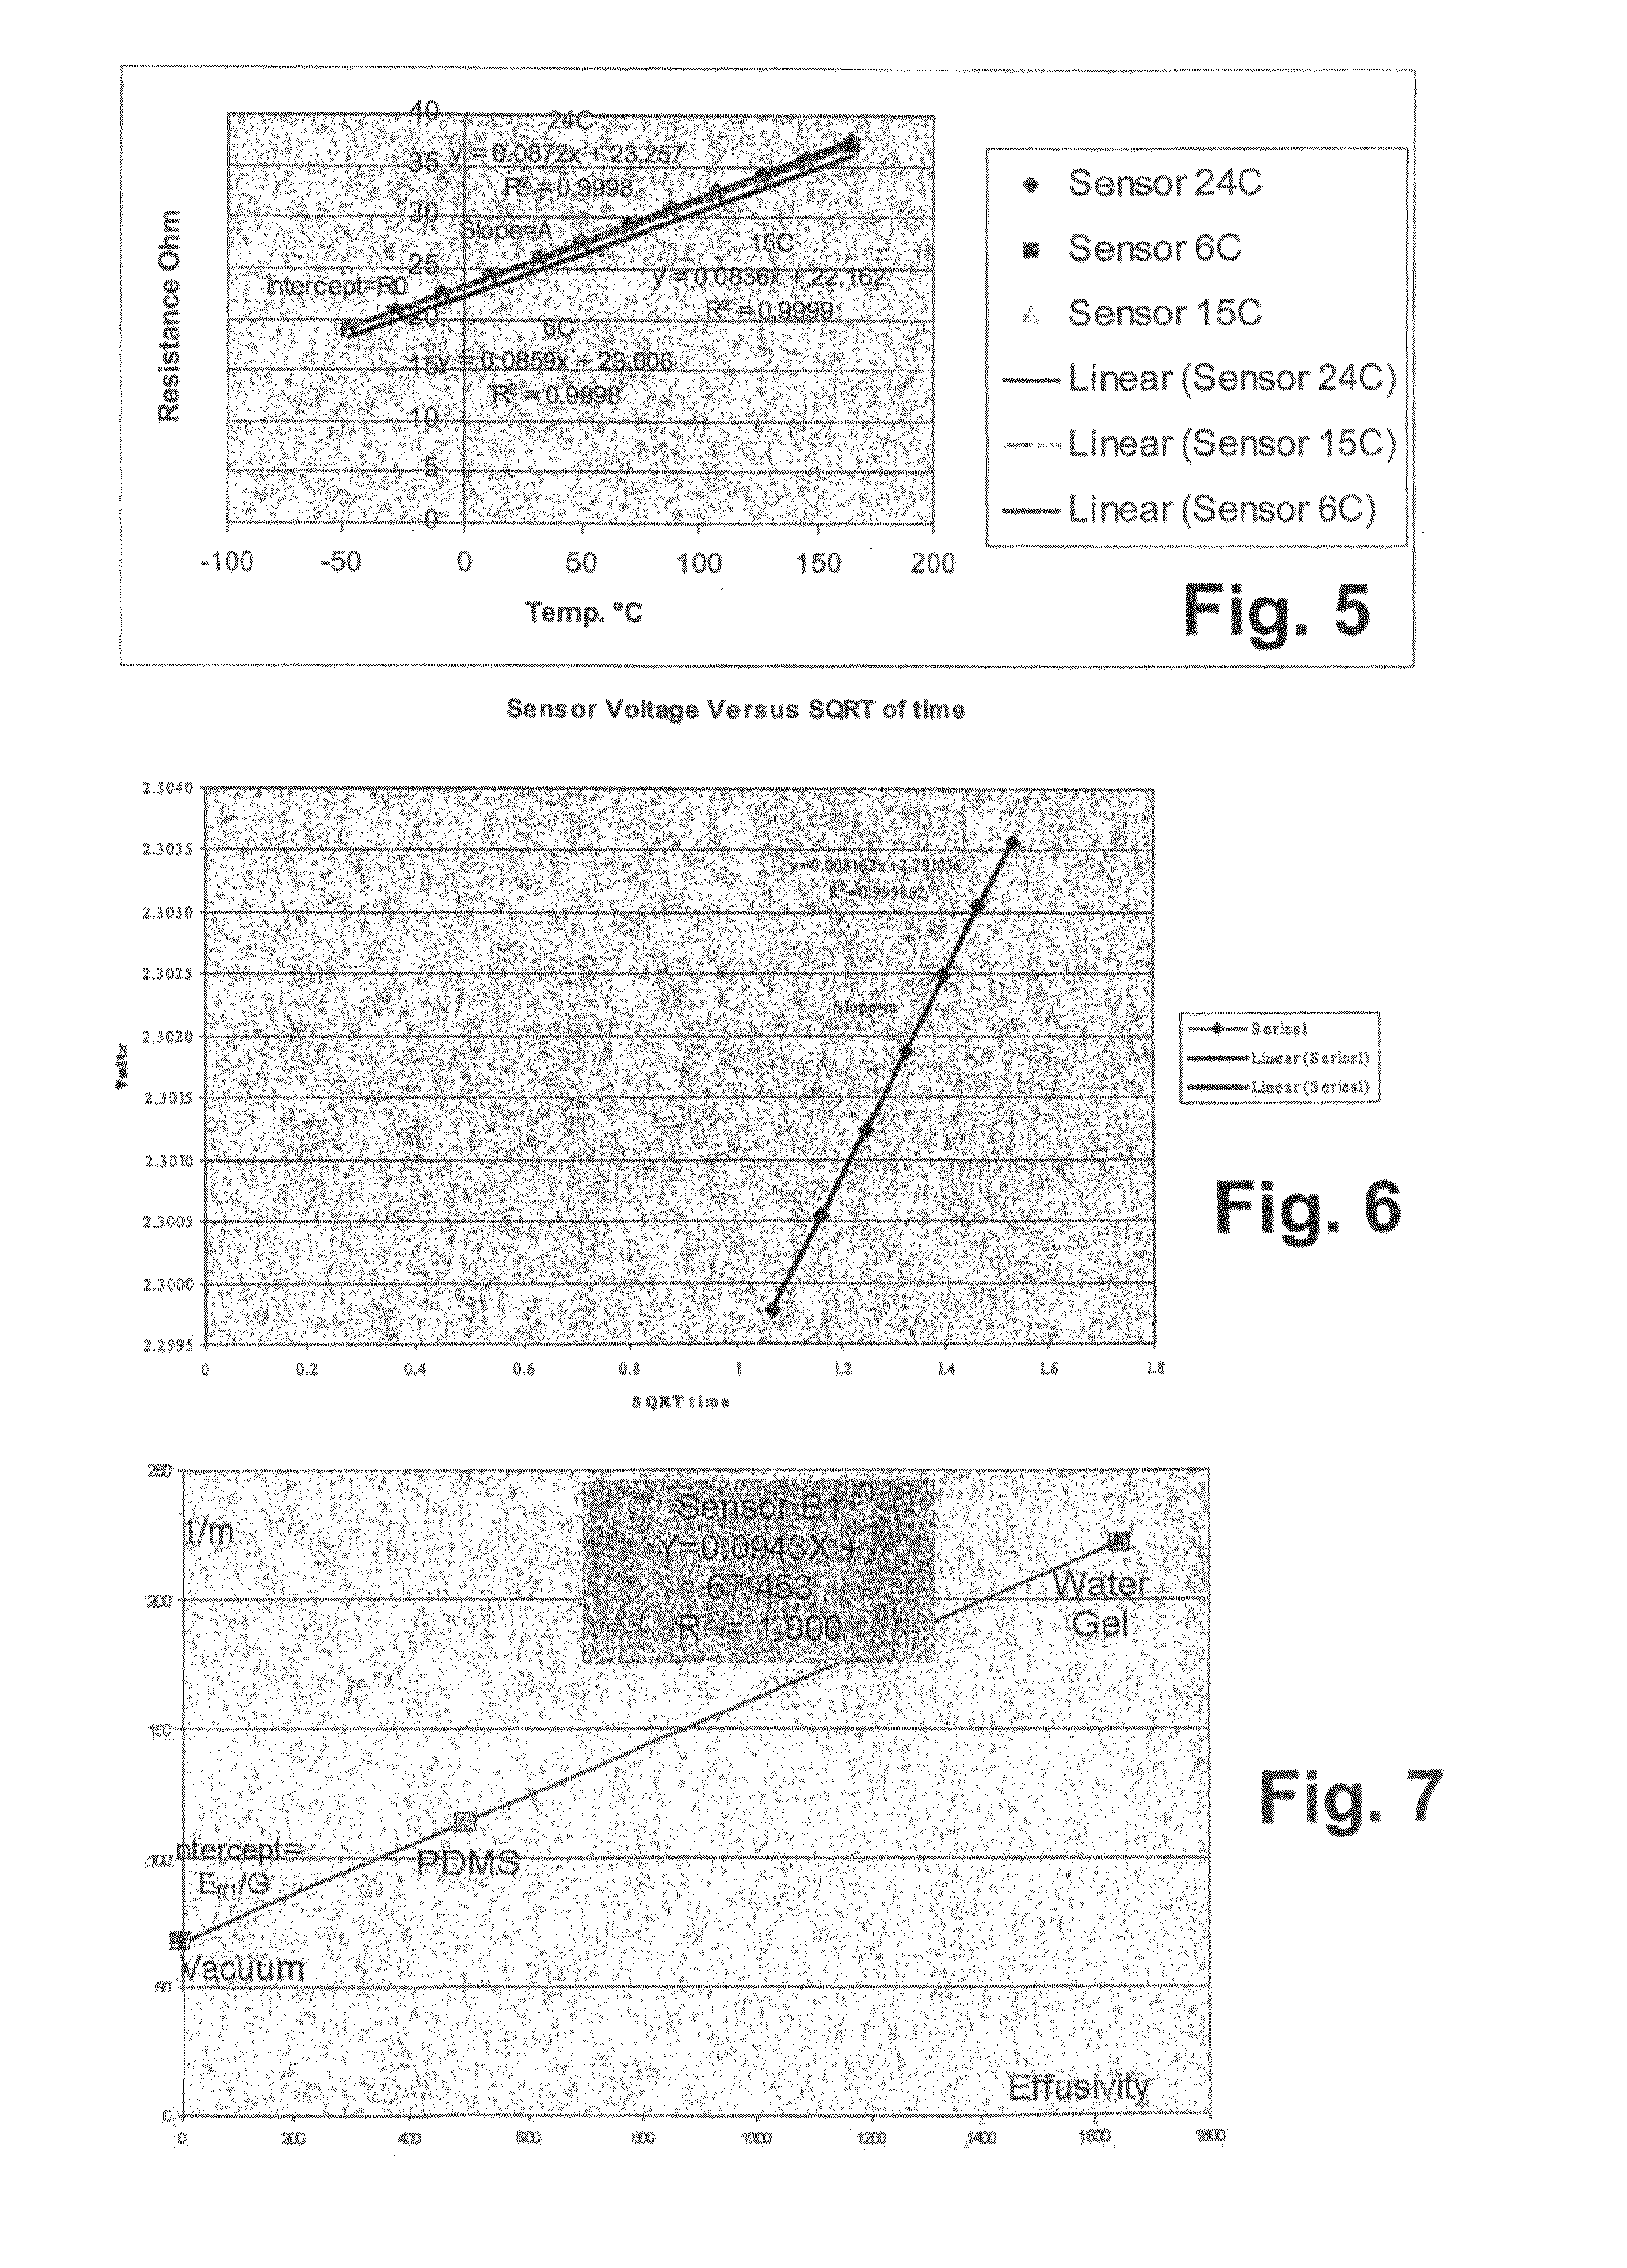 Method and apparatus for monitoring materials